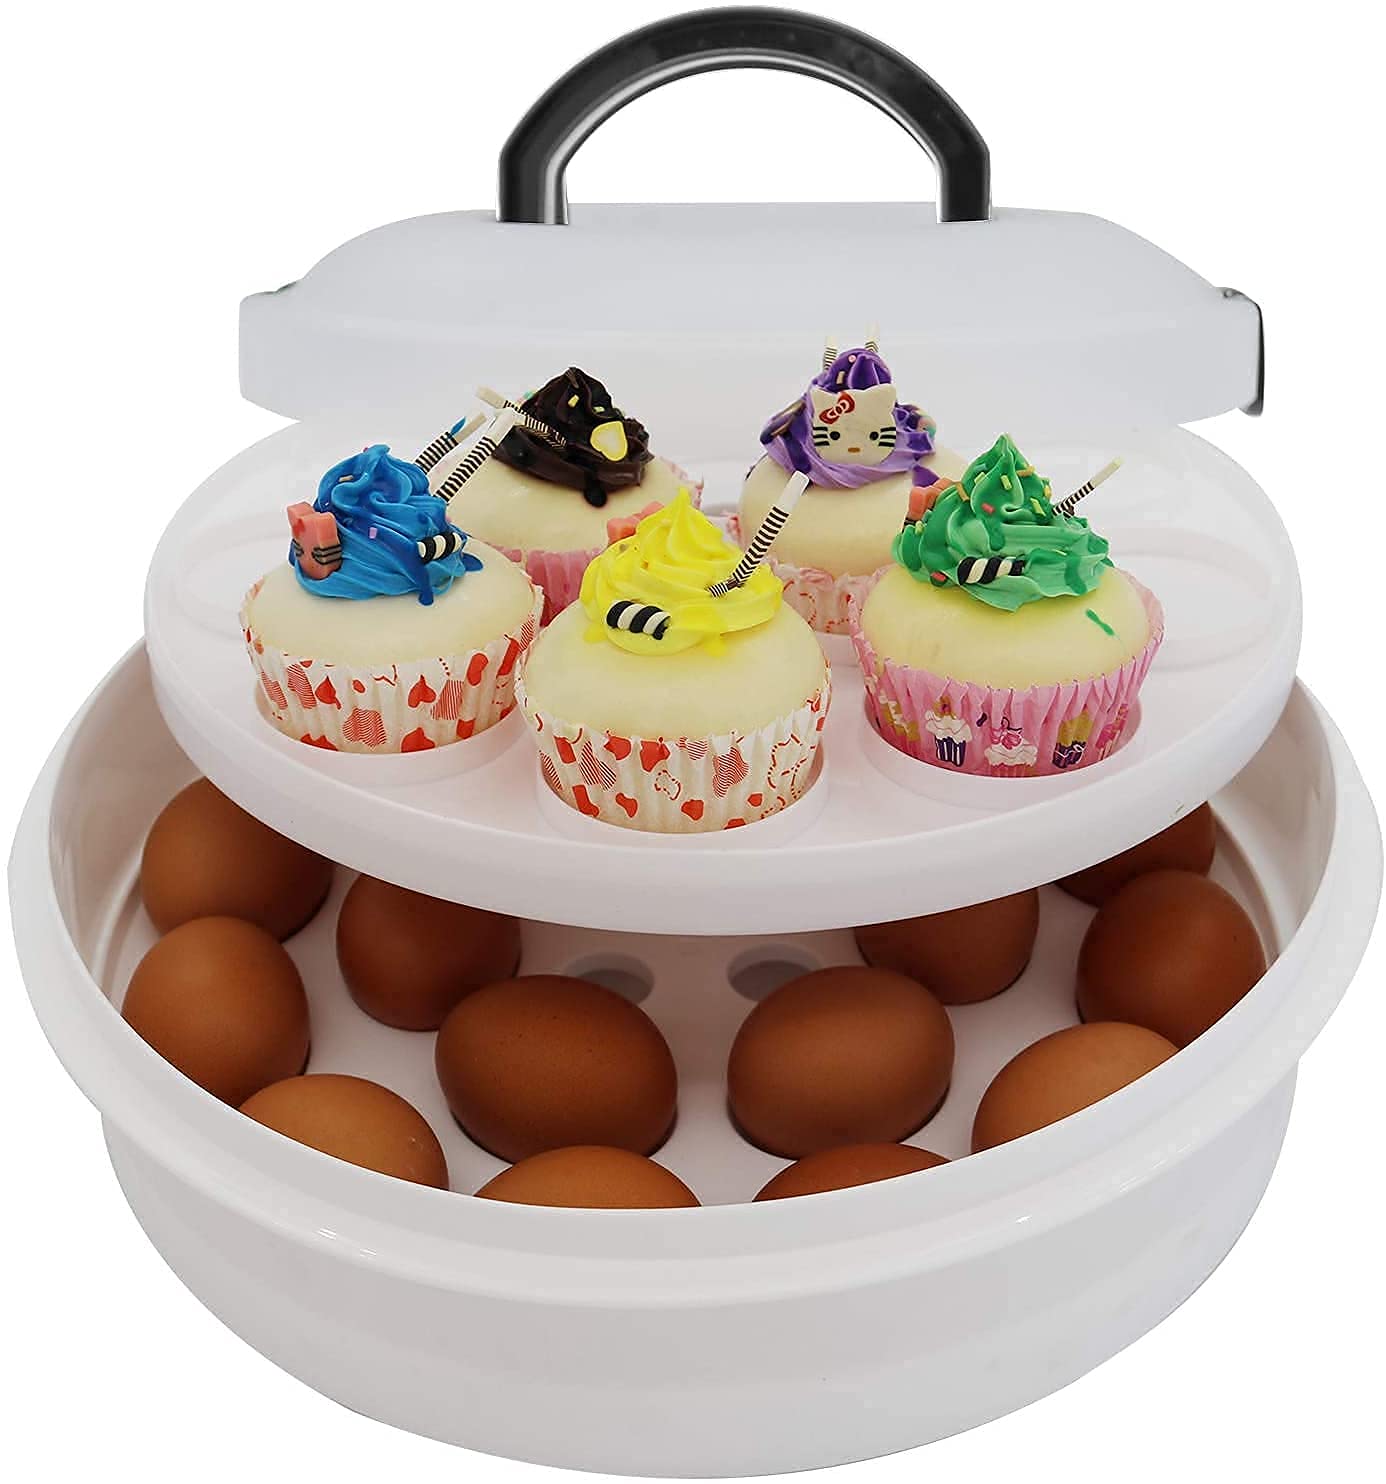 FEOOWV 10 Inch Portable Pie Carrier with Lid and Tray 3-In-1 Round Cupcake Container Egg Holder Muffin Tart Cookie Keeper Food (Grey)